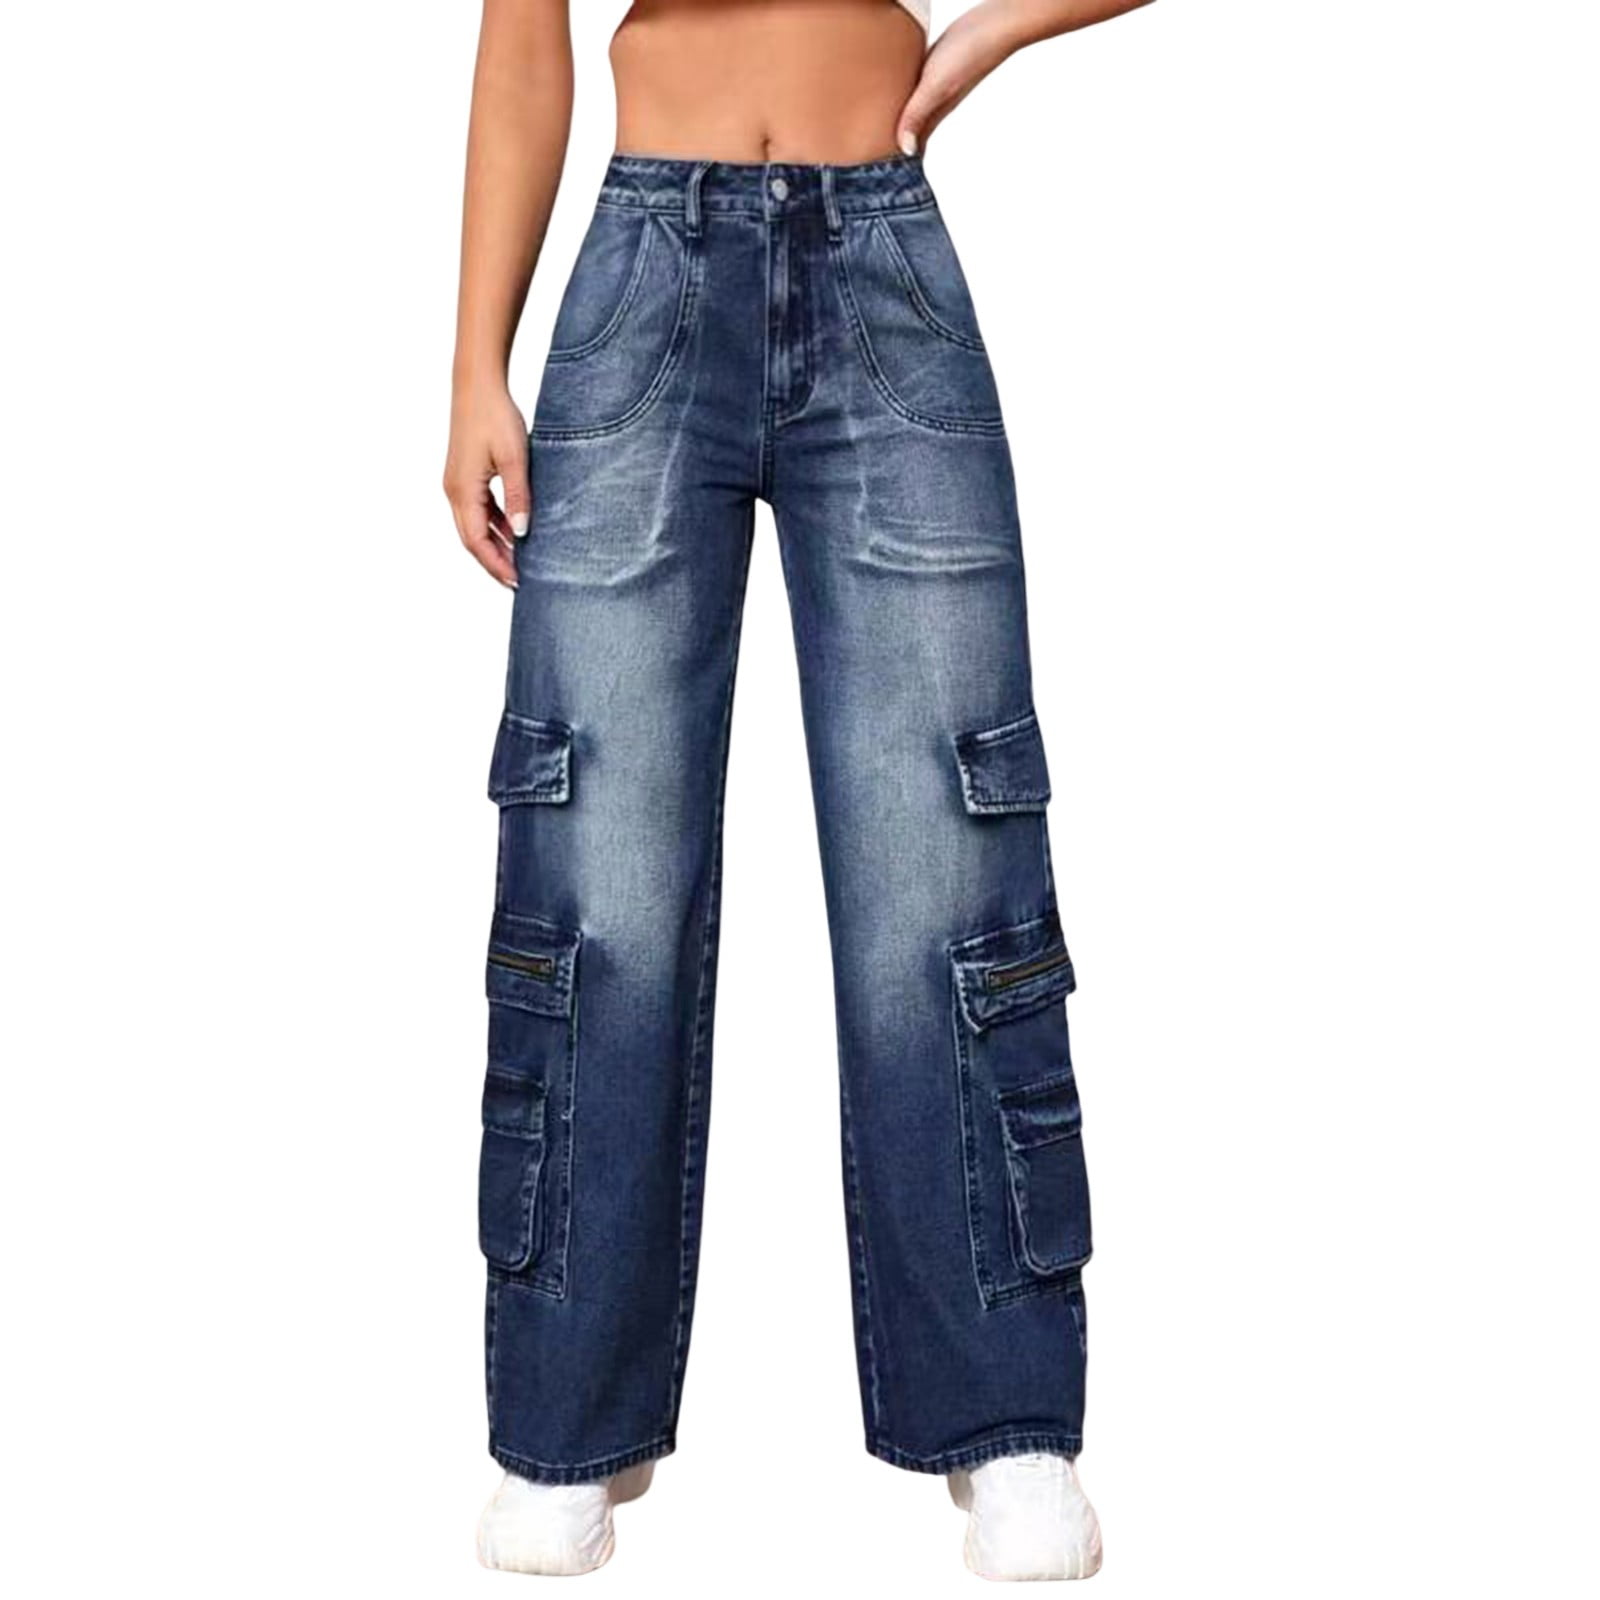 SZXZYGS Womens Jeans High Waisted Stretchy Plus Size Women's Wide Leg ...